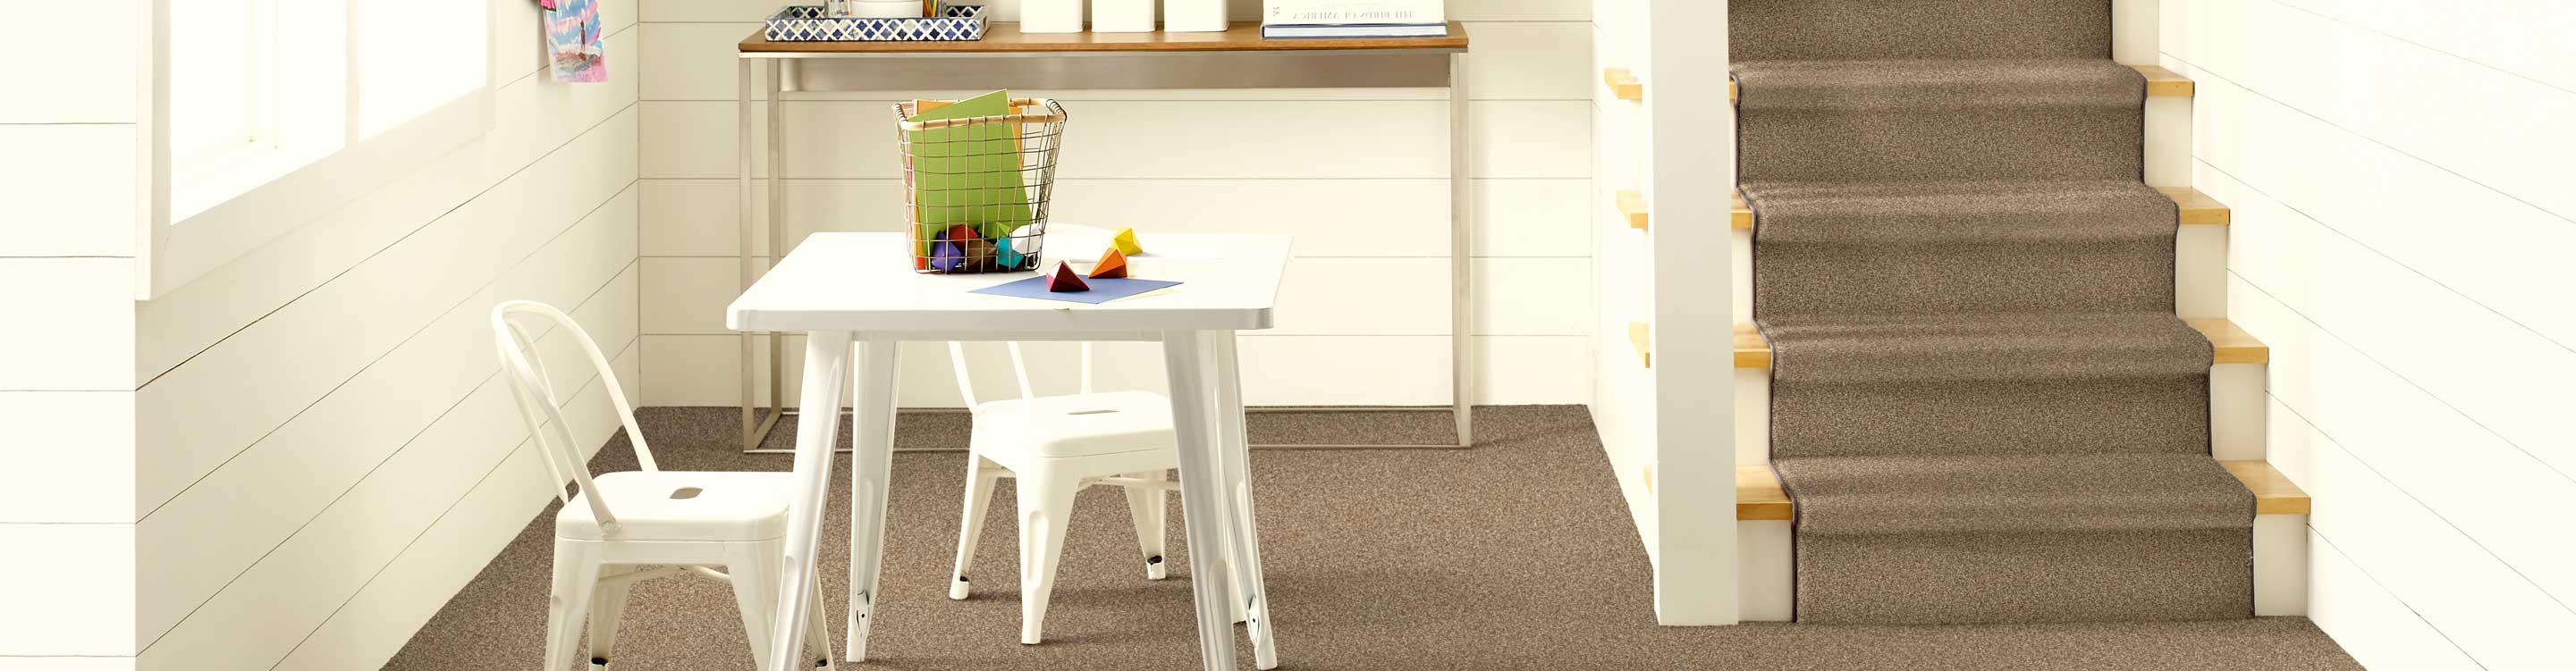 brown stair runner on staircase and carpet in living area with kids toys